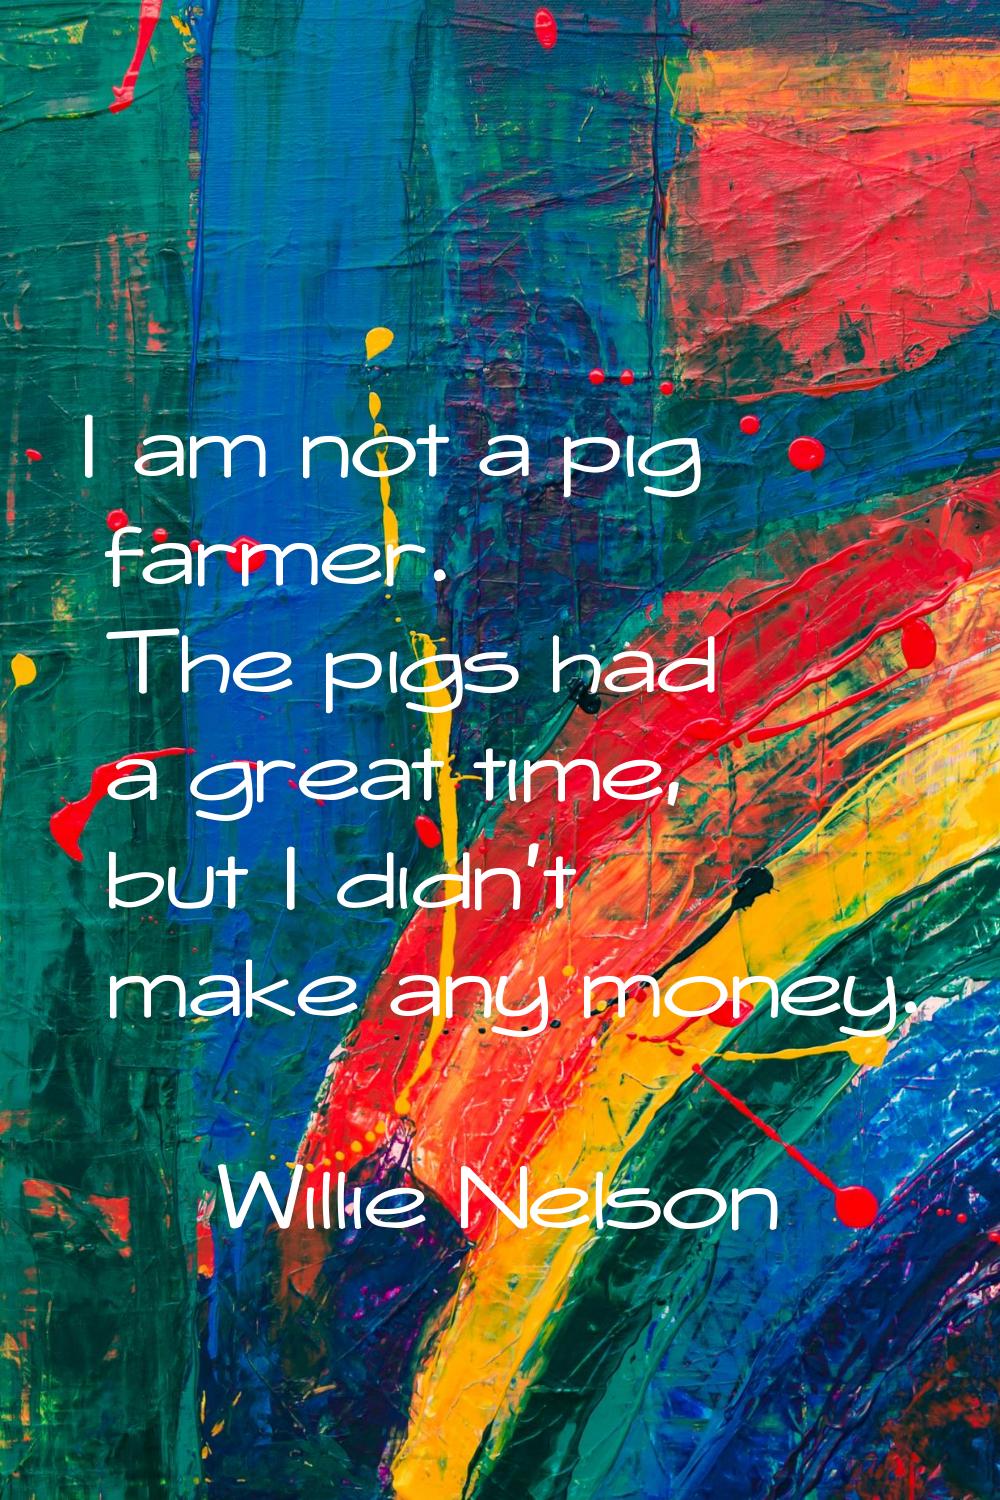 I am not a pig farmer. The pigs had a great time, but I didn't make any money.